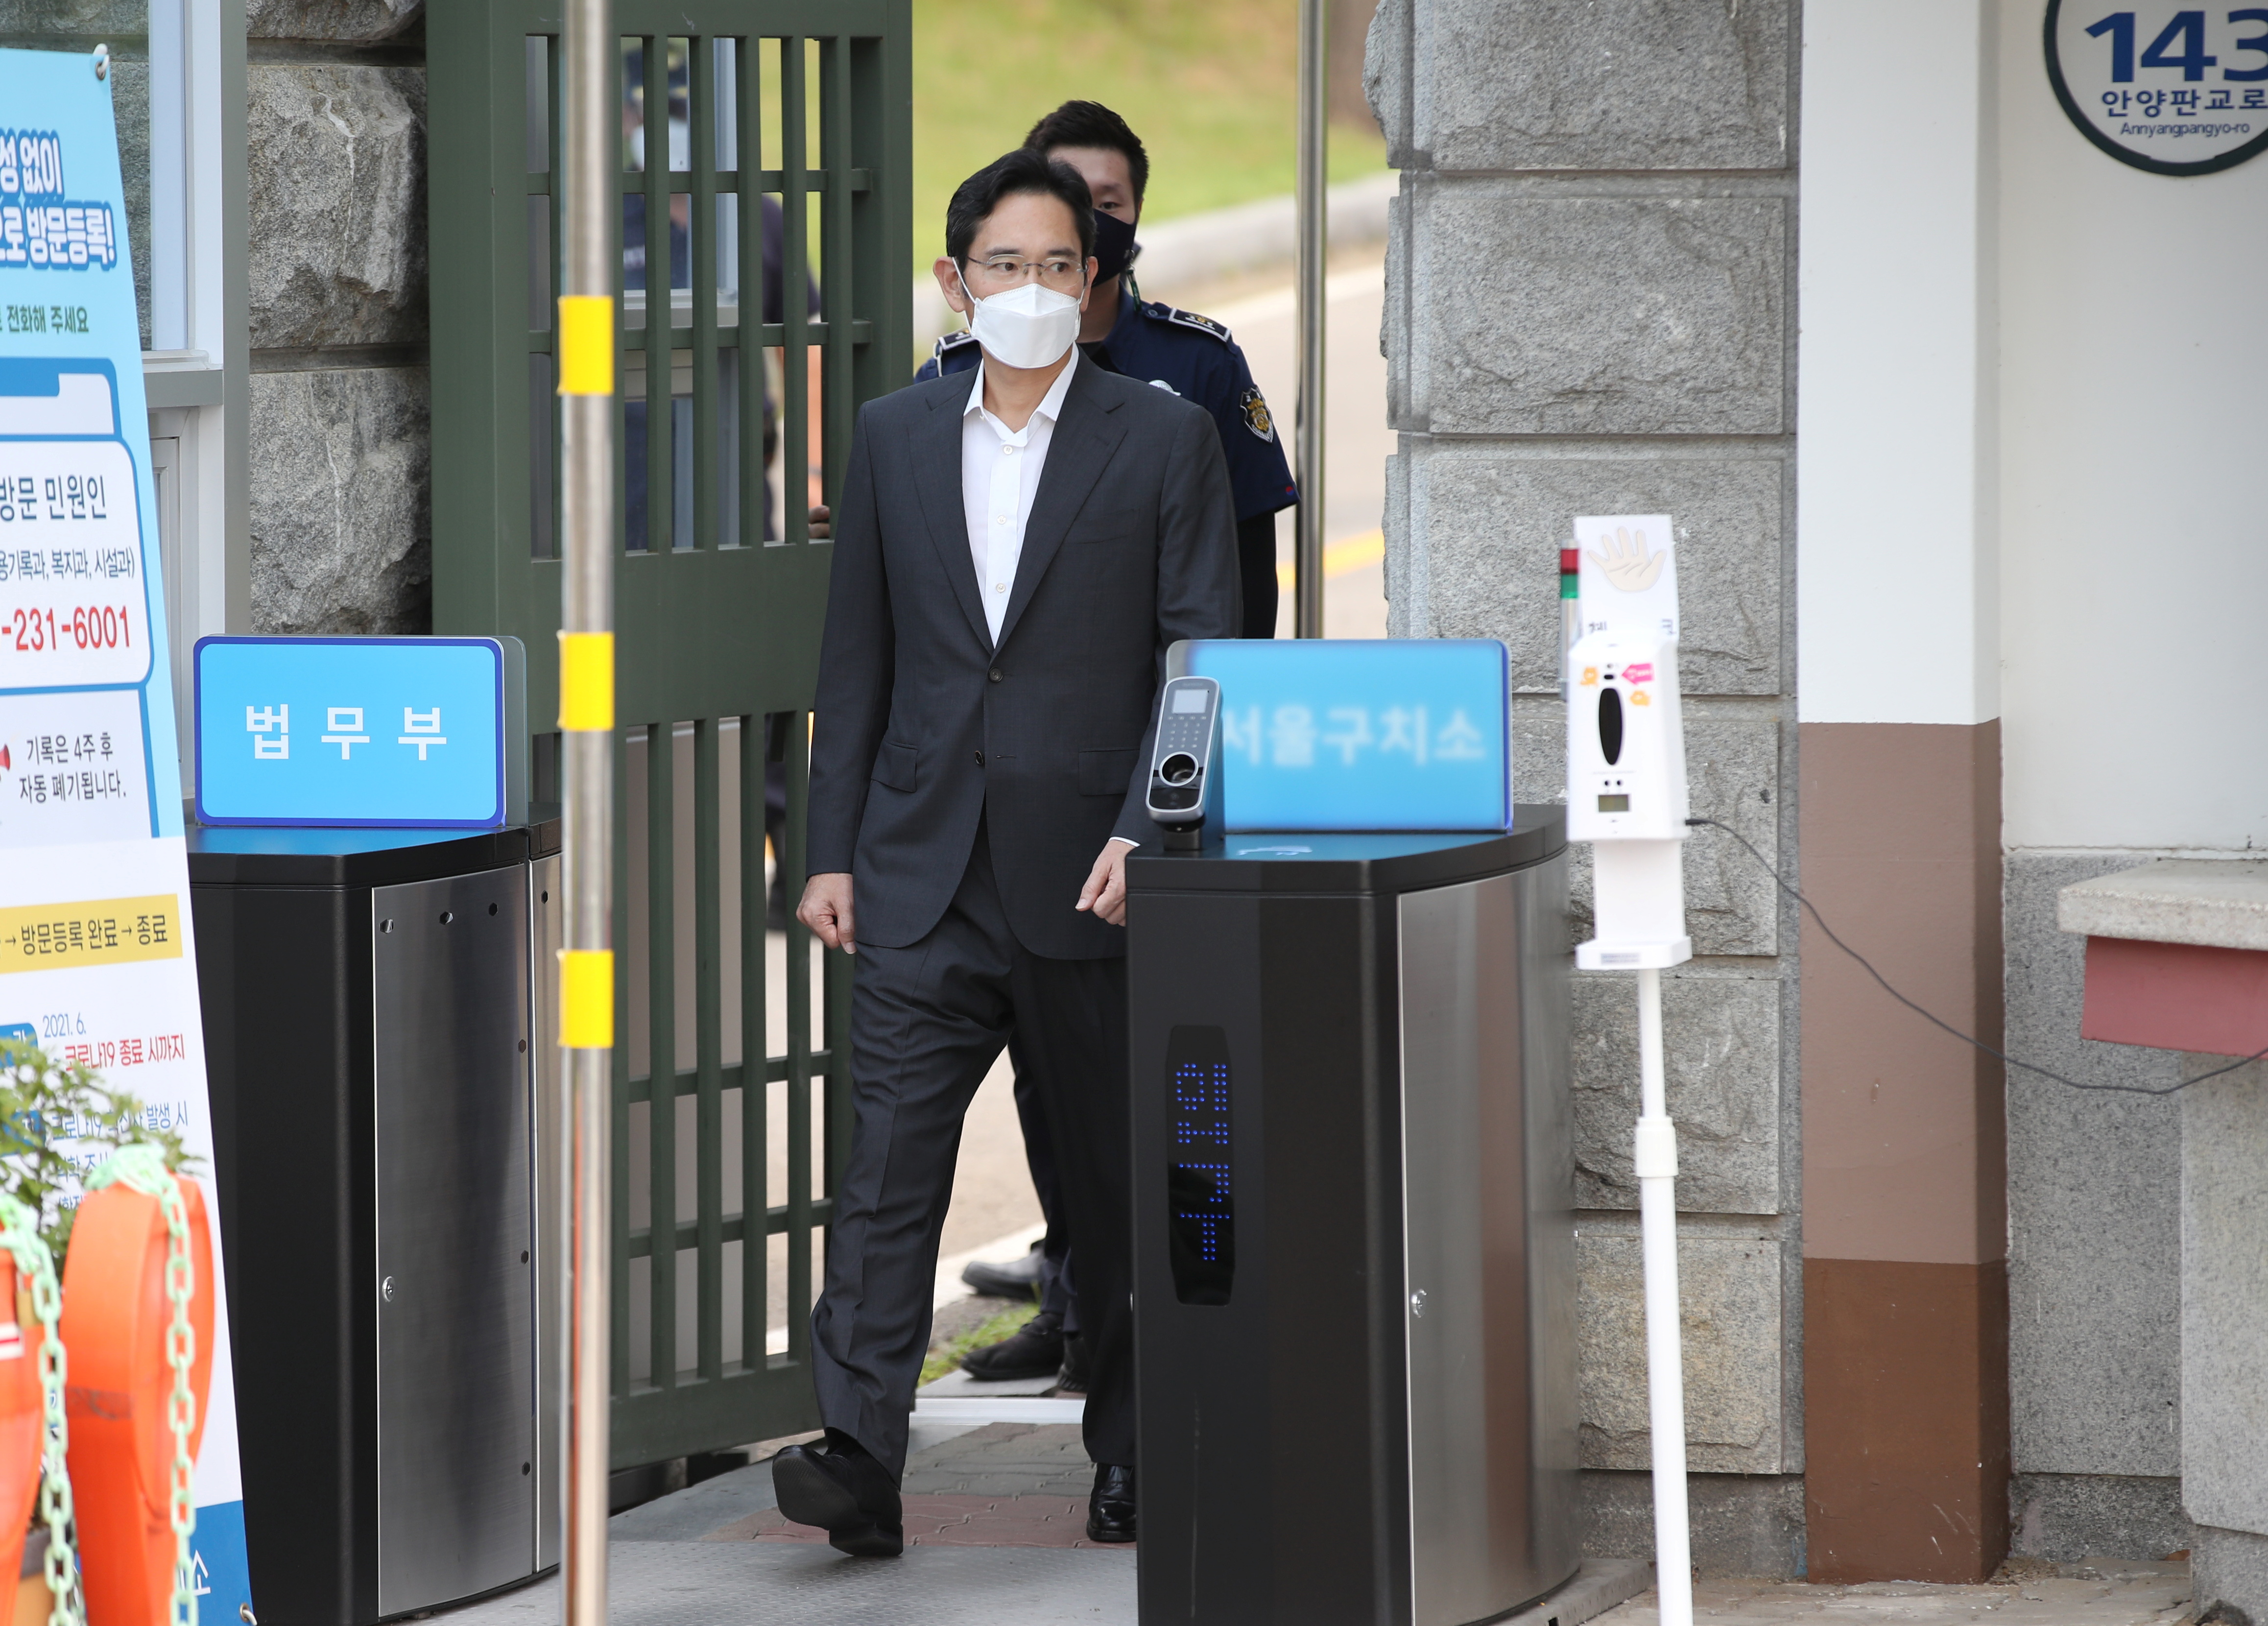 Samsung Electronics vice chairman Jay Y. Lee walks as he is released on parole from Seoul Detention Center in Uiwang, South Korea, August 13, 2021. Yonhap via REUTERS